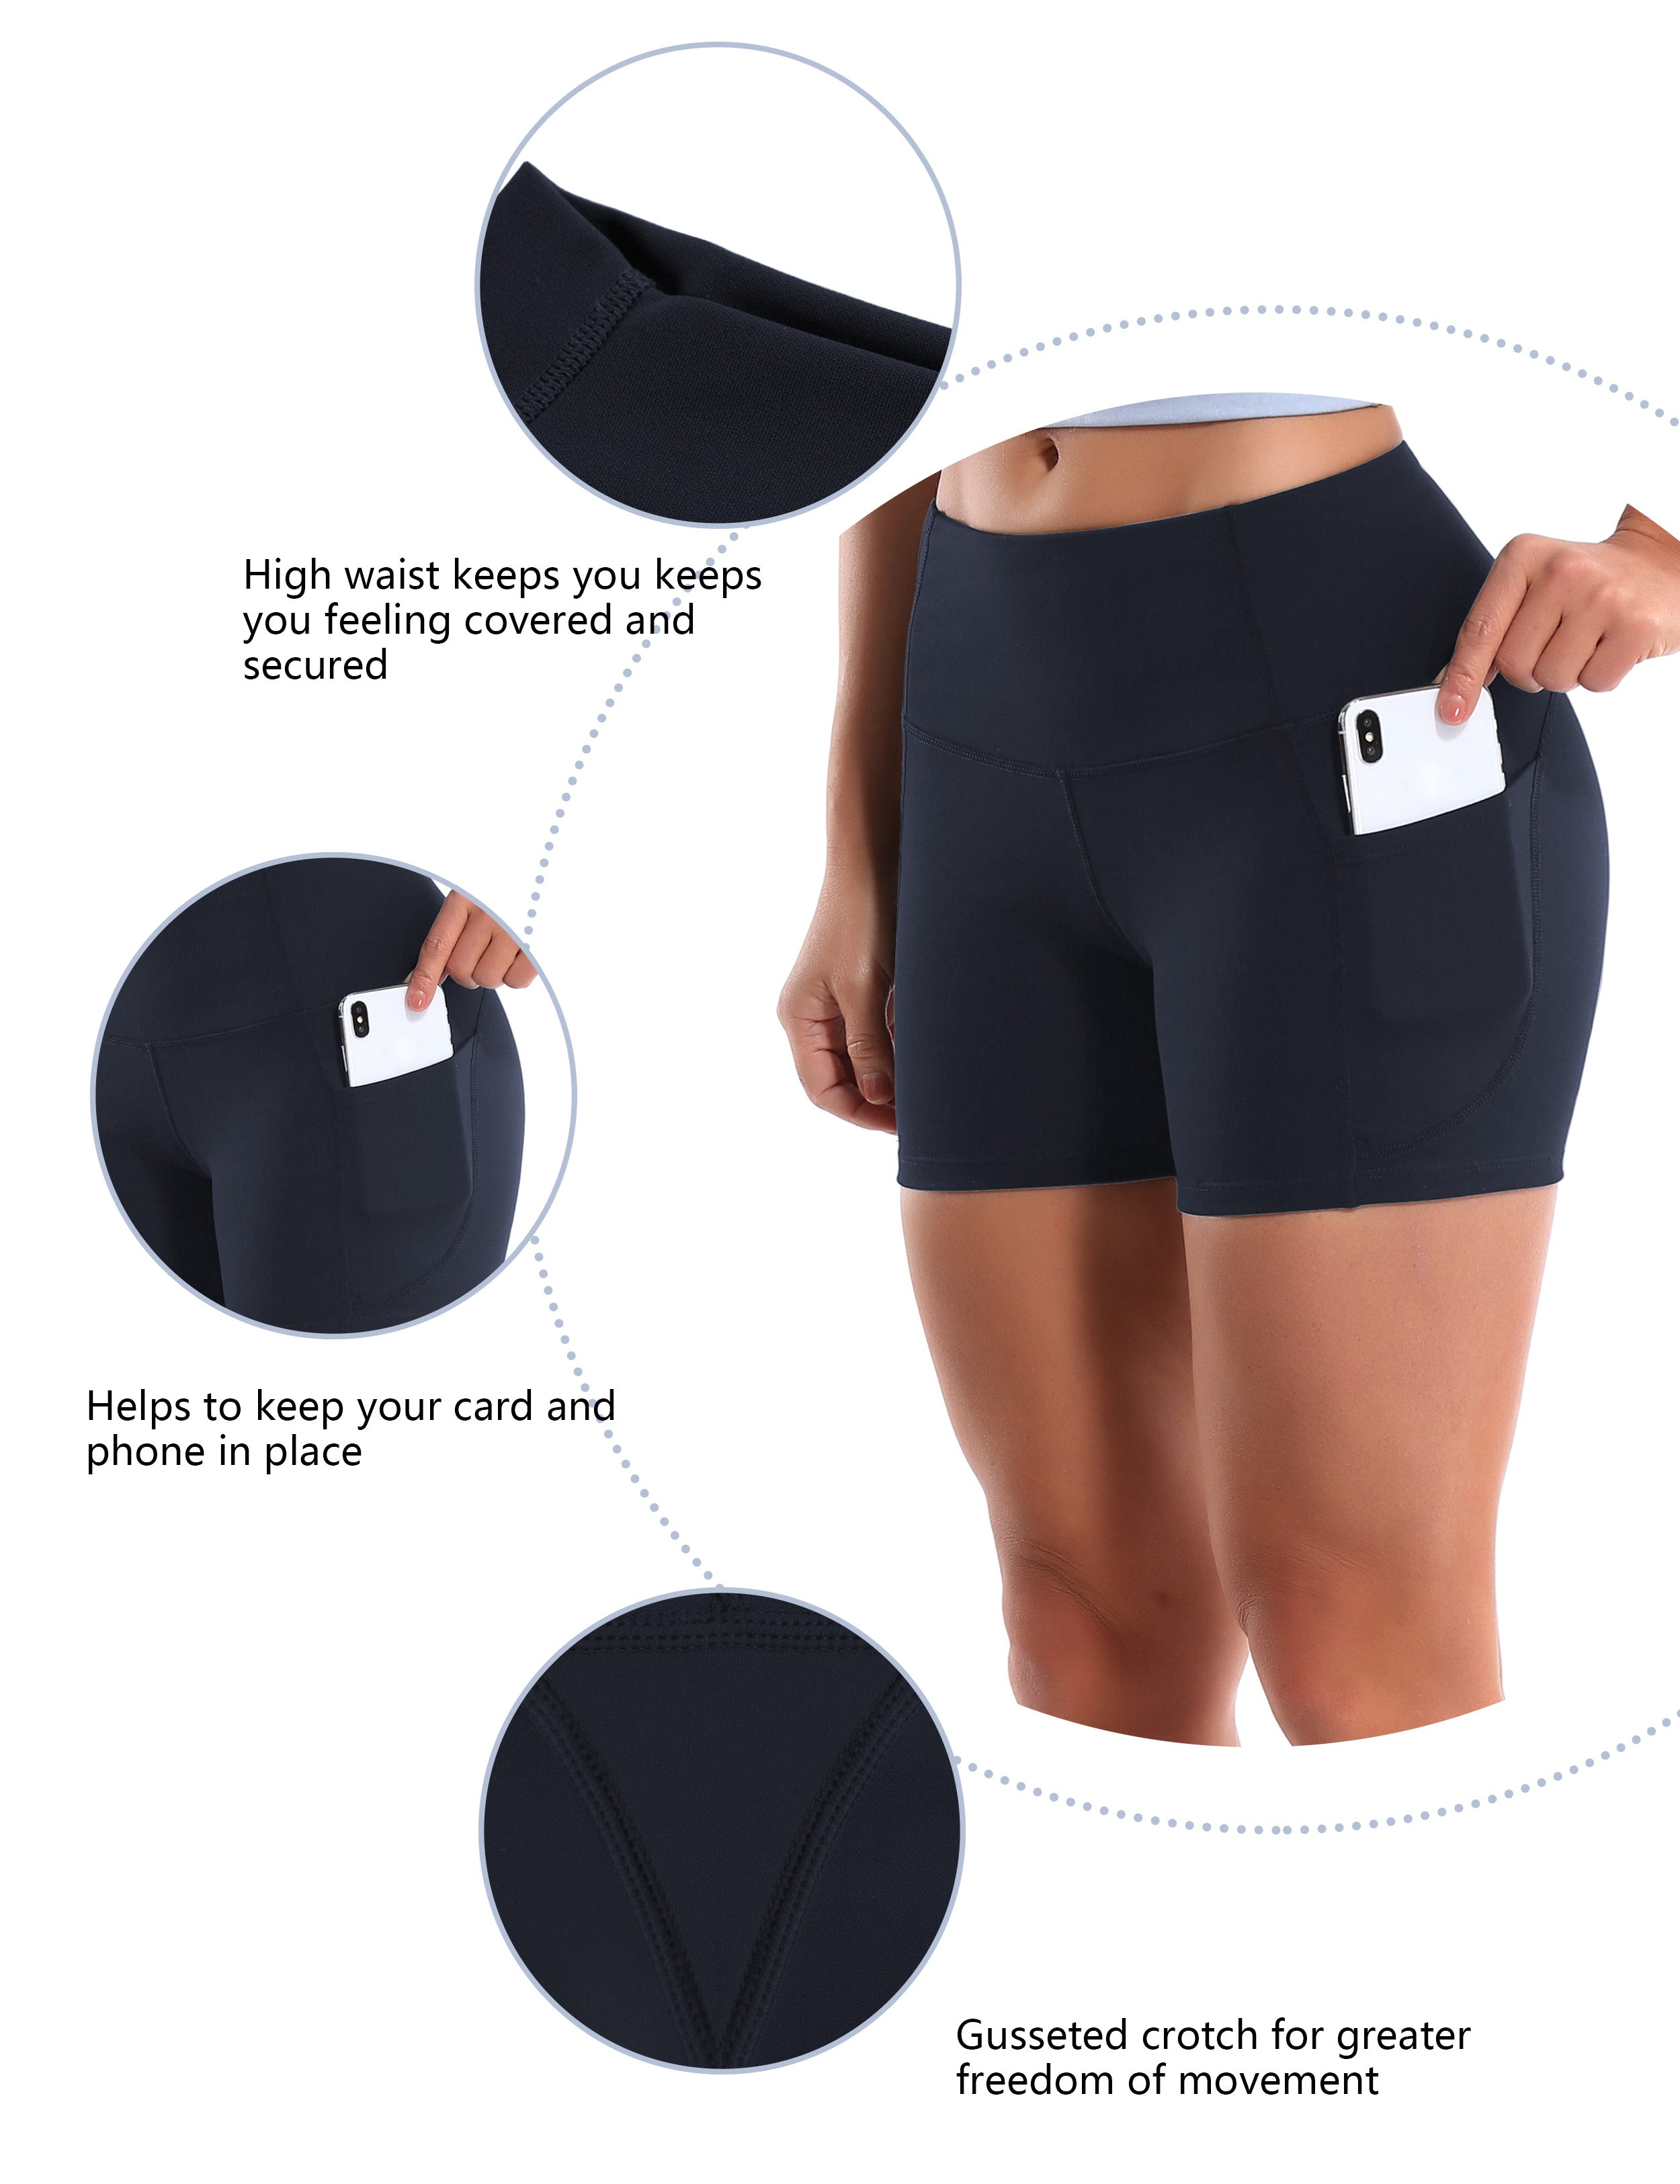 High Waist Side Pockets Pilates Shorts darkblue Softest-ever fabric High elasticity 4-way stretch Fabric doesn't attract lint easily No see-through Moisture-wicking Machine wash 88% Nylon, 12% Spandex